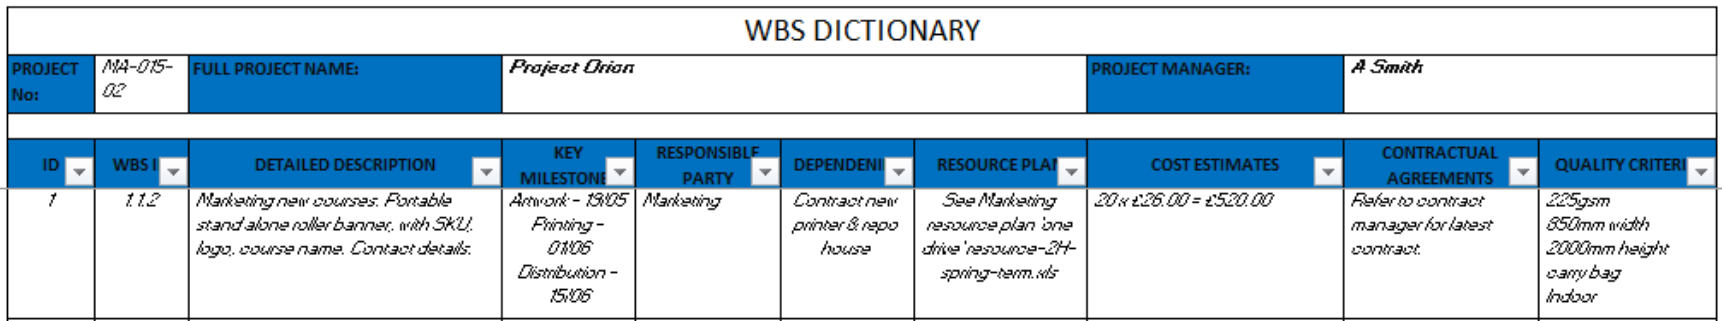 WBS Dictionary Example